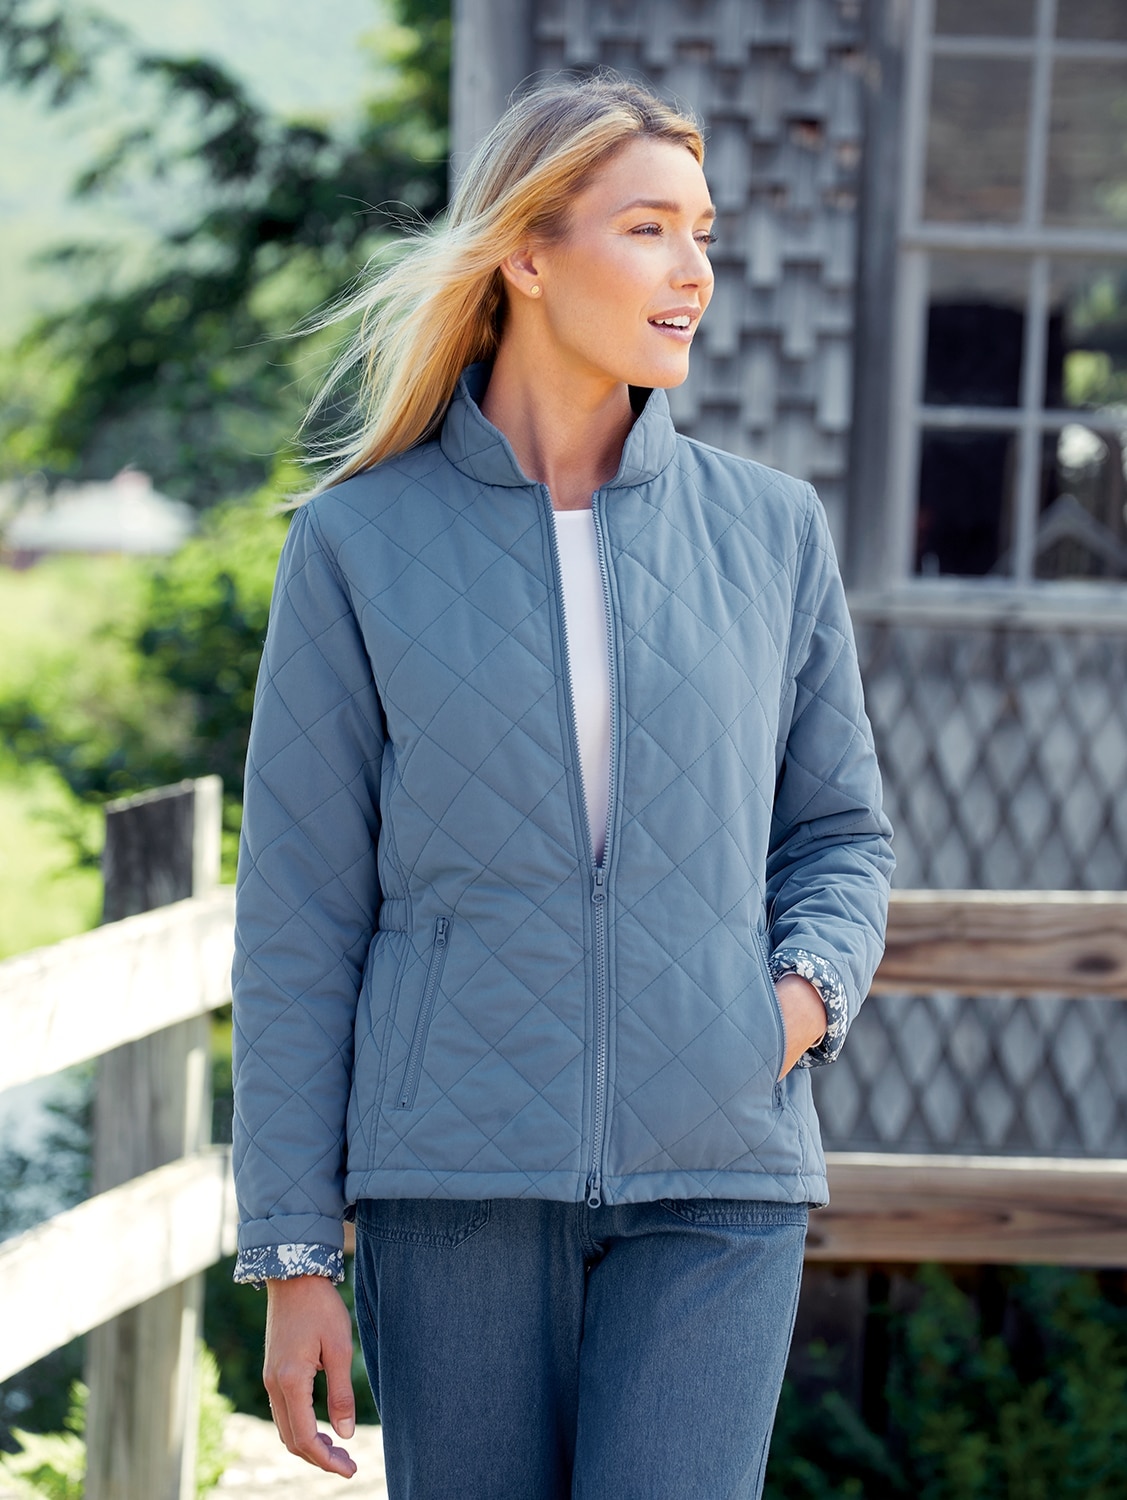 New Ladies Diamond Quilted Jacket Country Estate Grassmere 2 Lower Pockets 10-18 